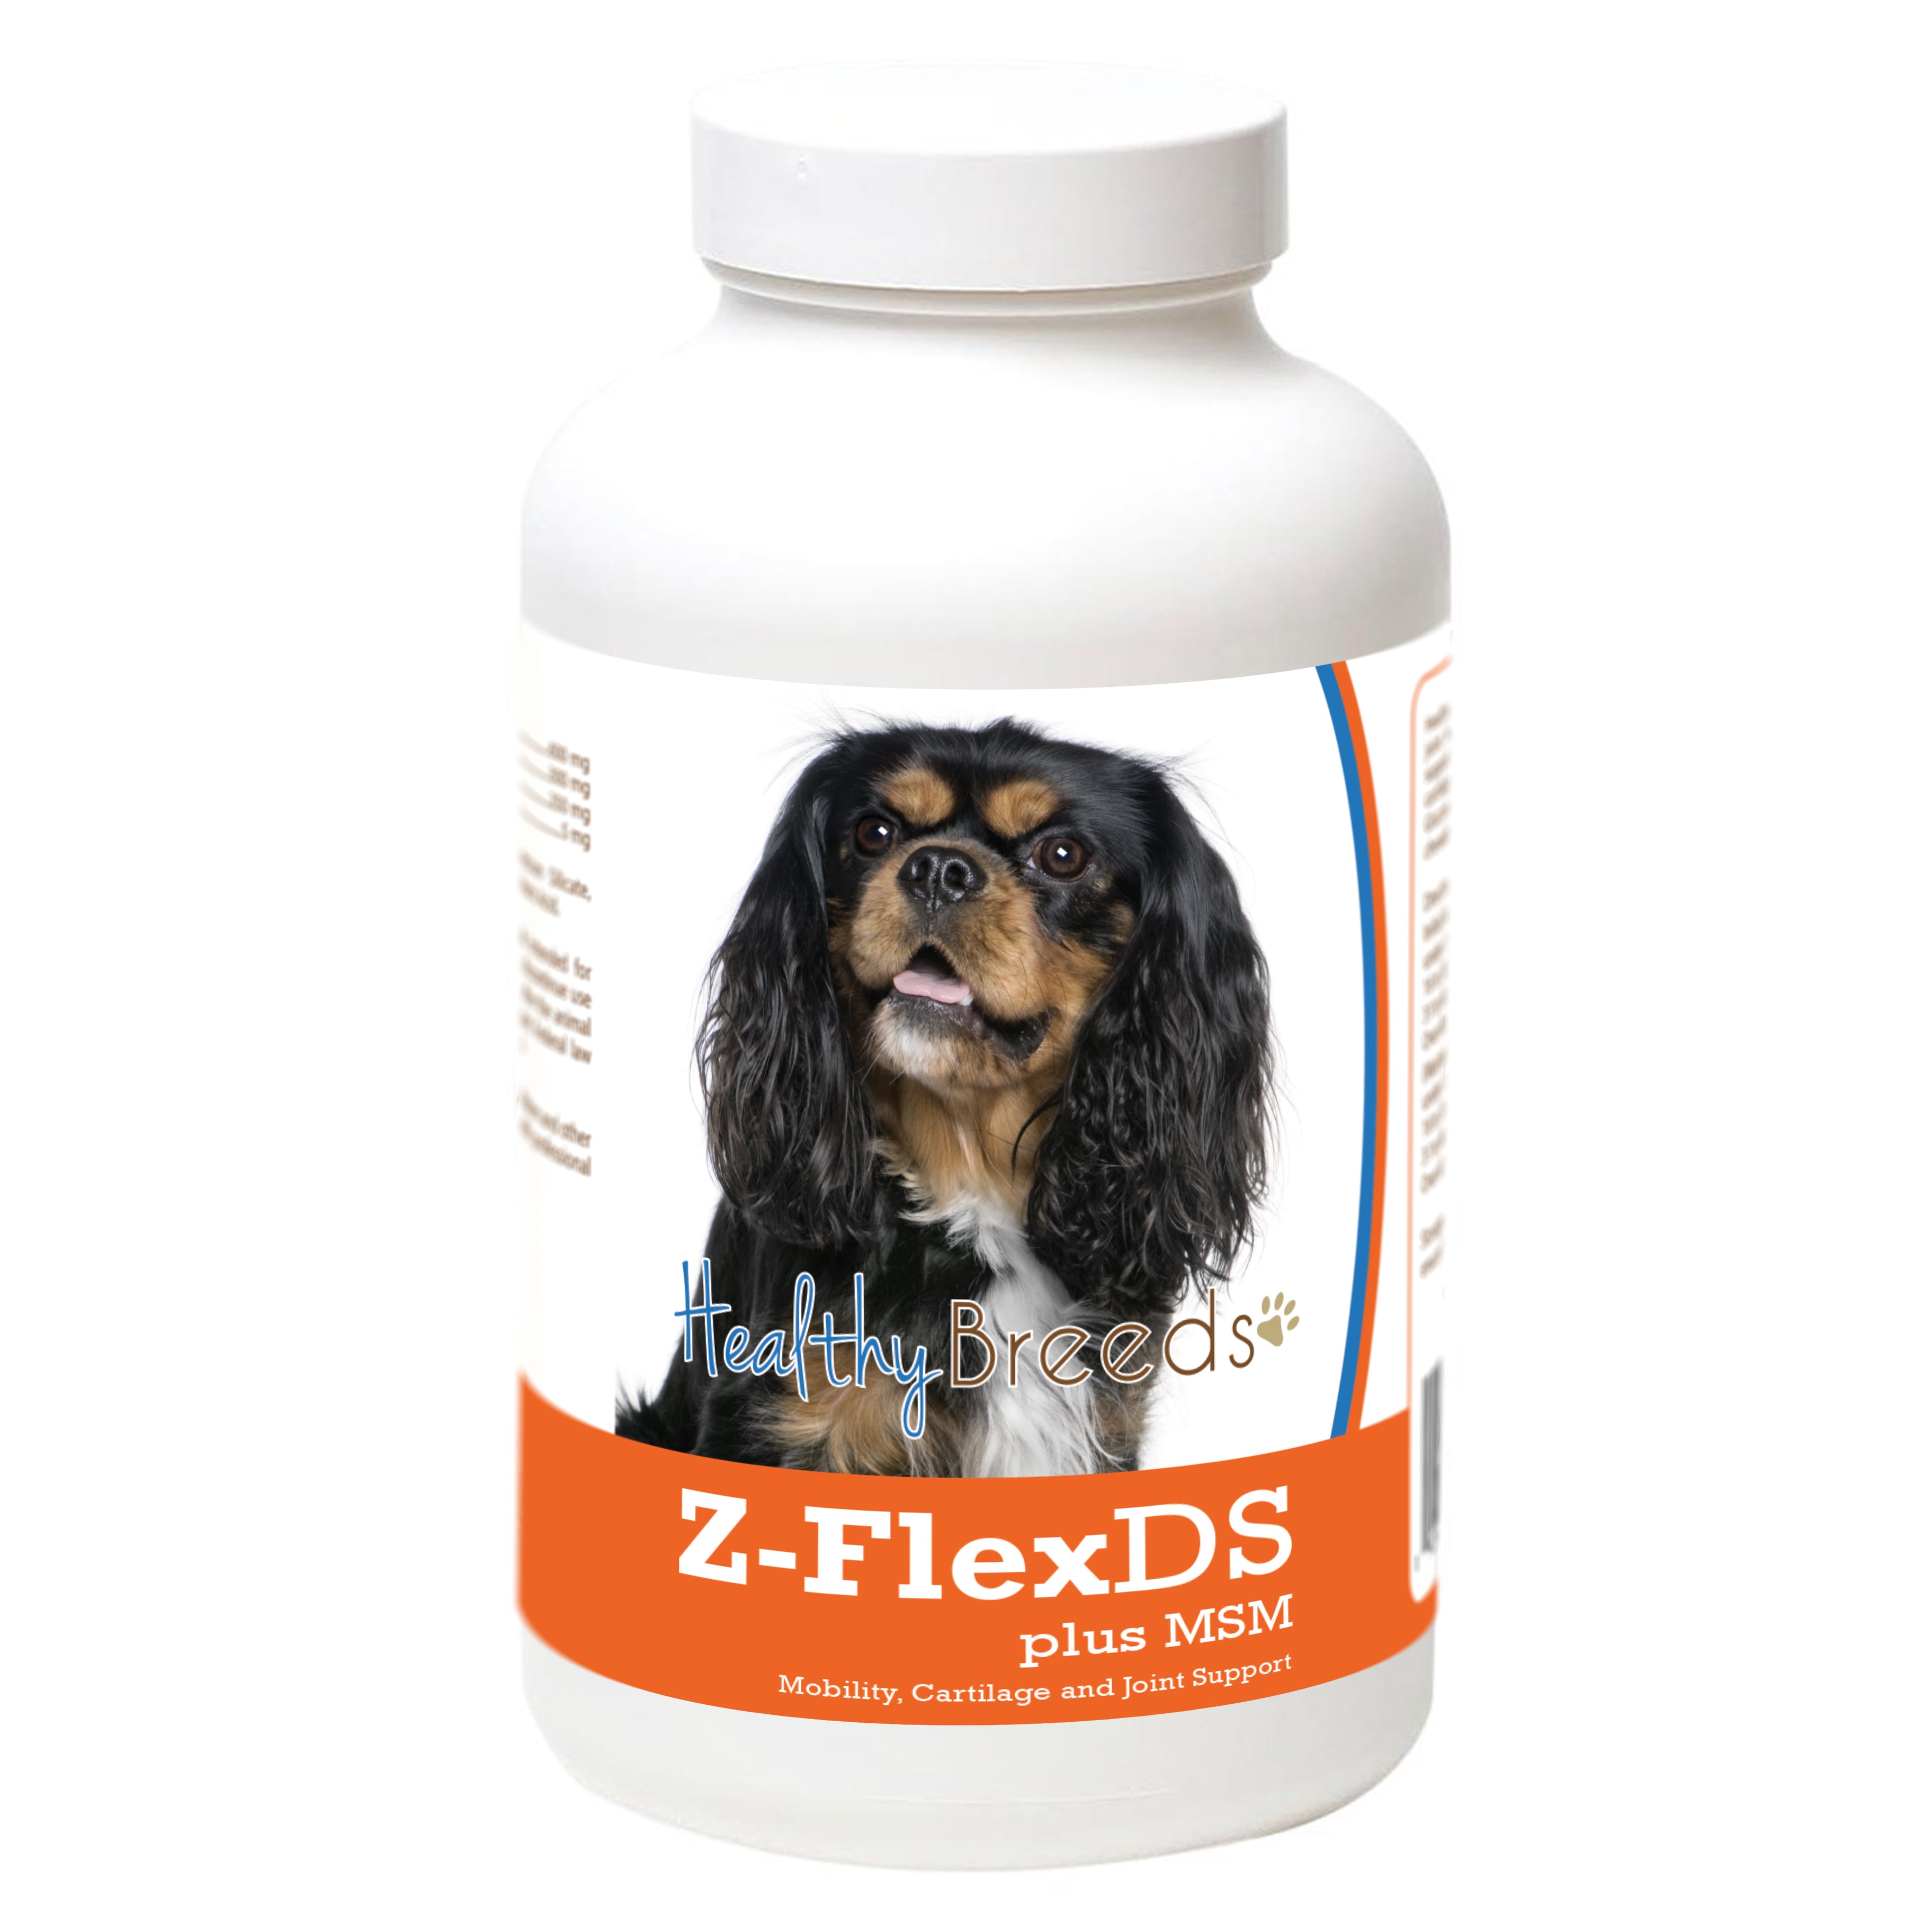 Cavalier King Charles Spaniel Z-FlexDS plus MSM Chewable Tablets 60 Count